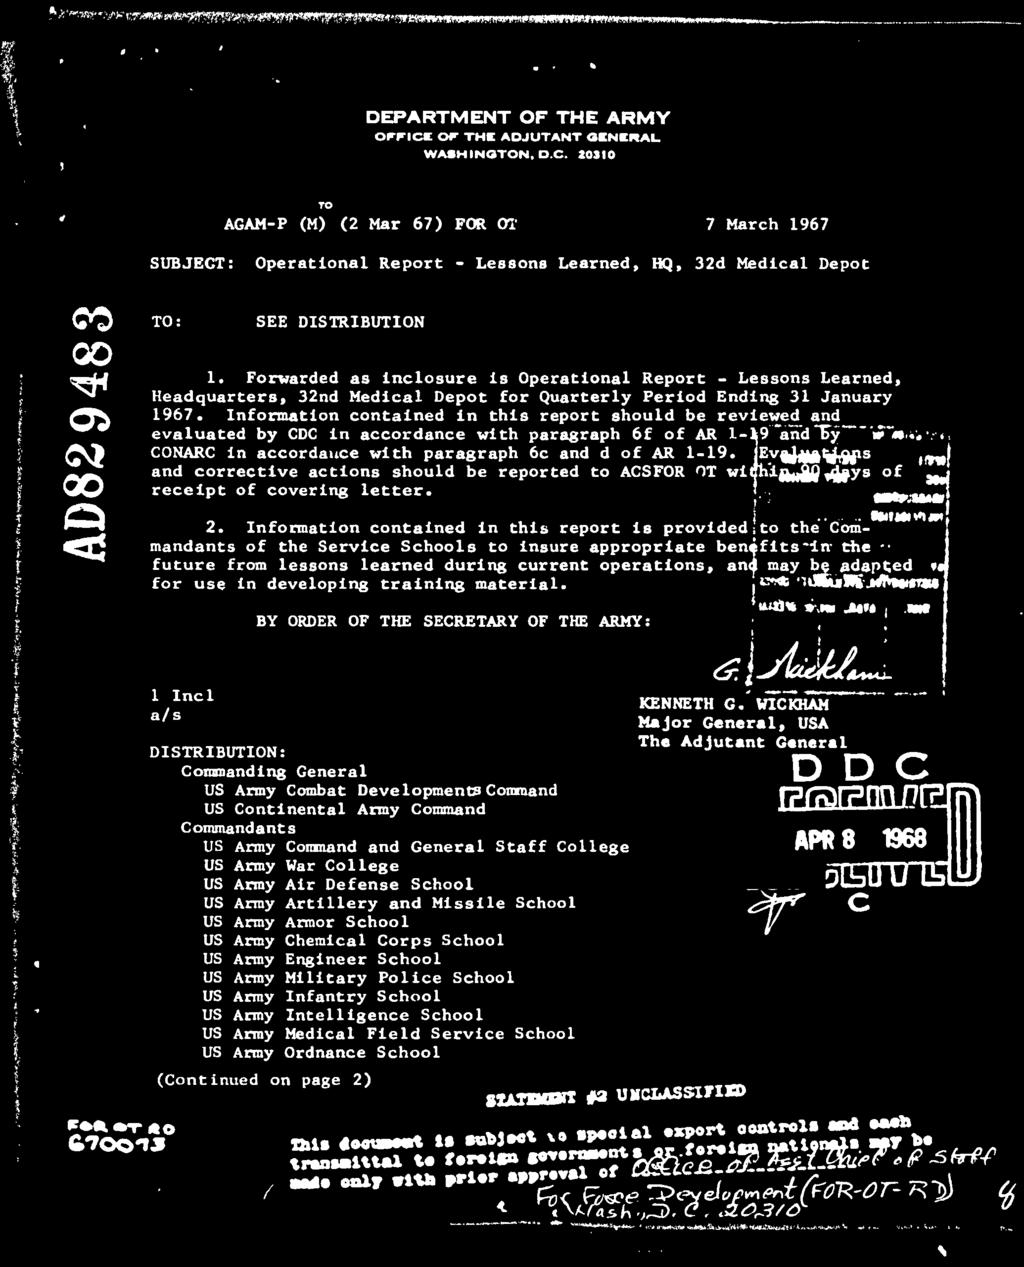 Forwarded as Inclosure Is Operational Report - Lessons Learned, Headquarters, 32nd Medical Depot for Quarterly Period Ending 31 January 1967.